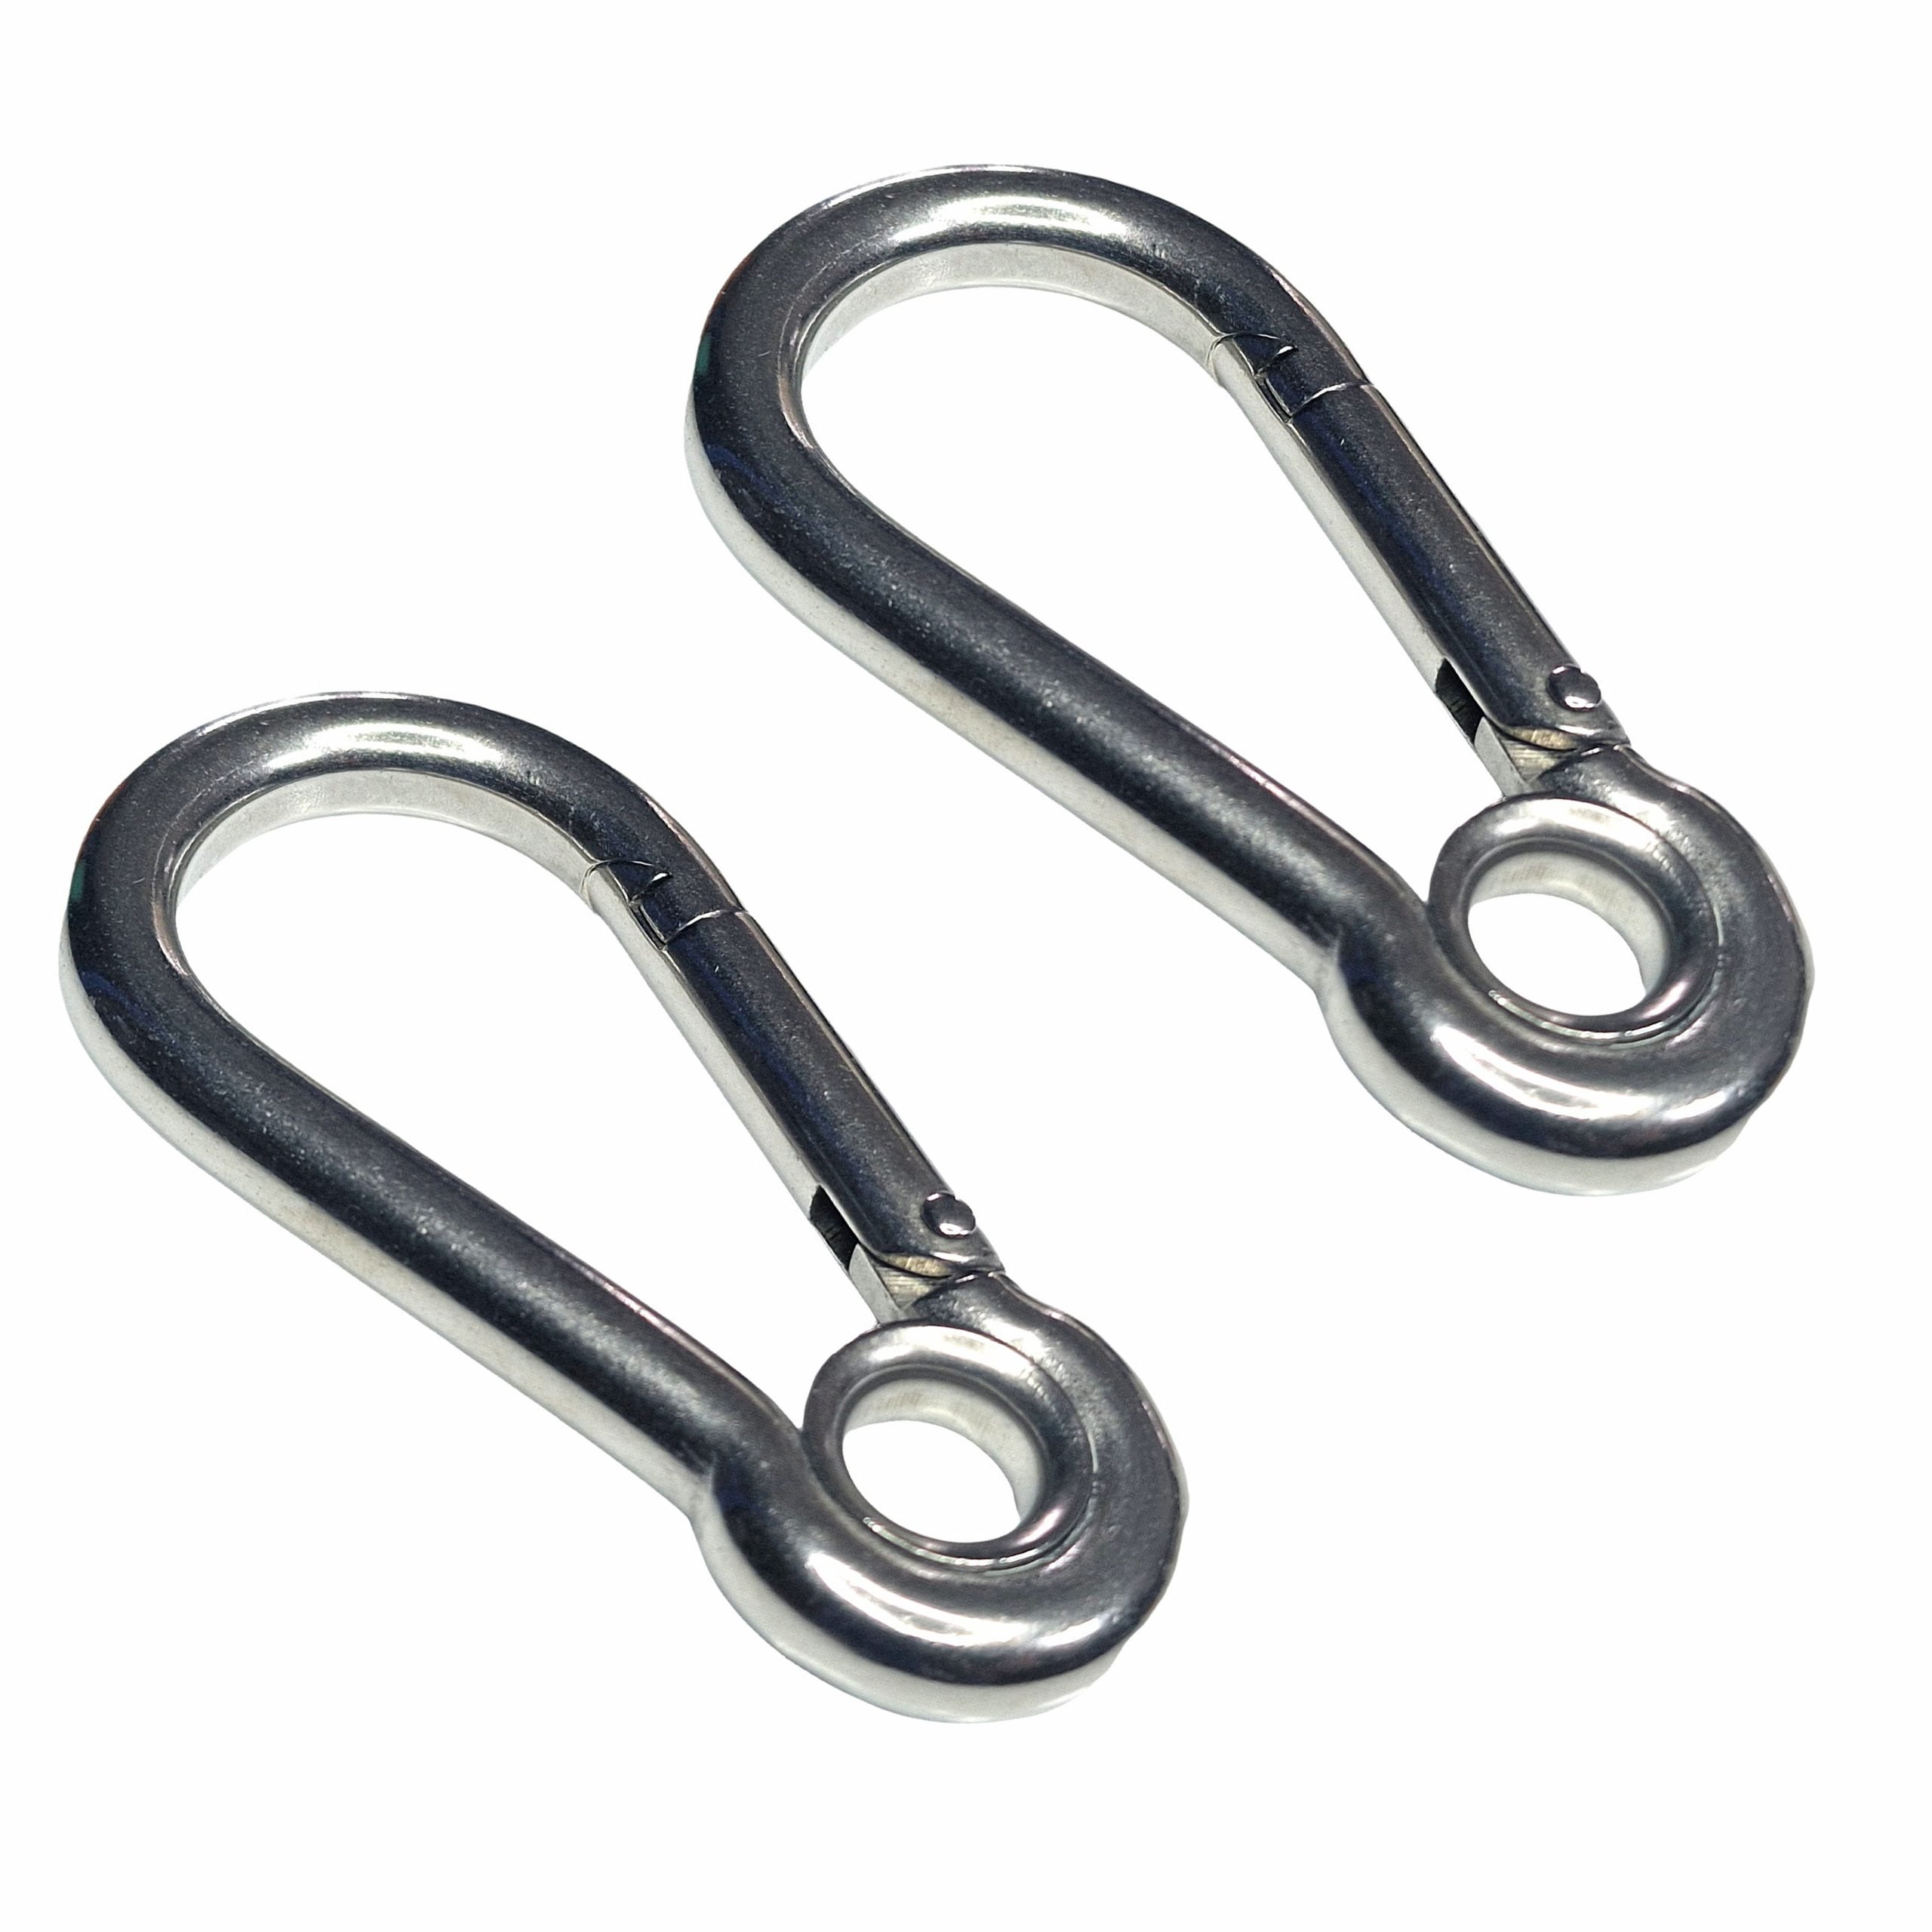 https://universal-hardware.co.uk/wp-content/uploads/2023/01/Carabiner-Spring-Snap-Hook-with-Eye-316-Stainless-Steel-picture-main-2-scaled.jpg